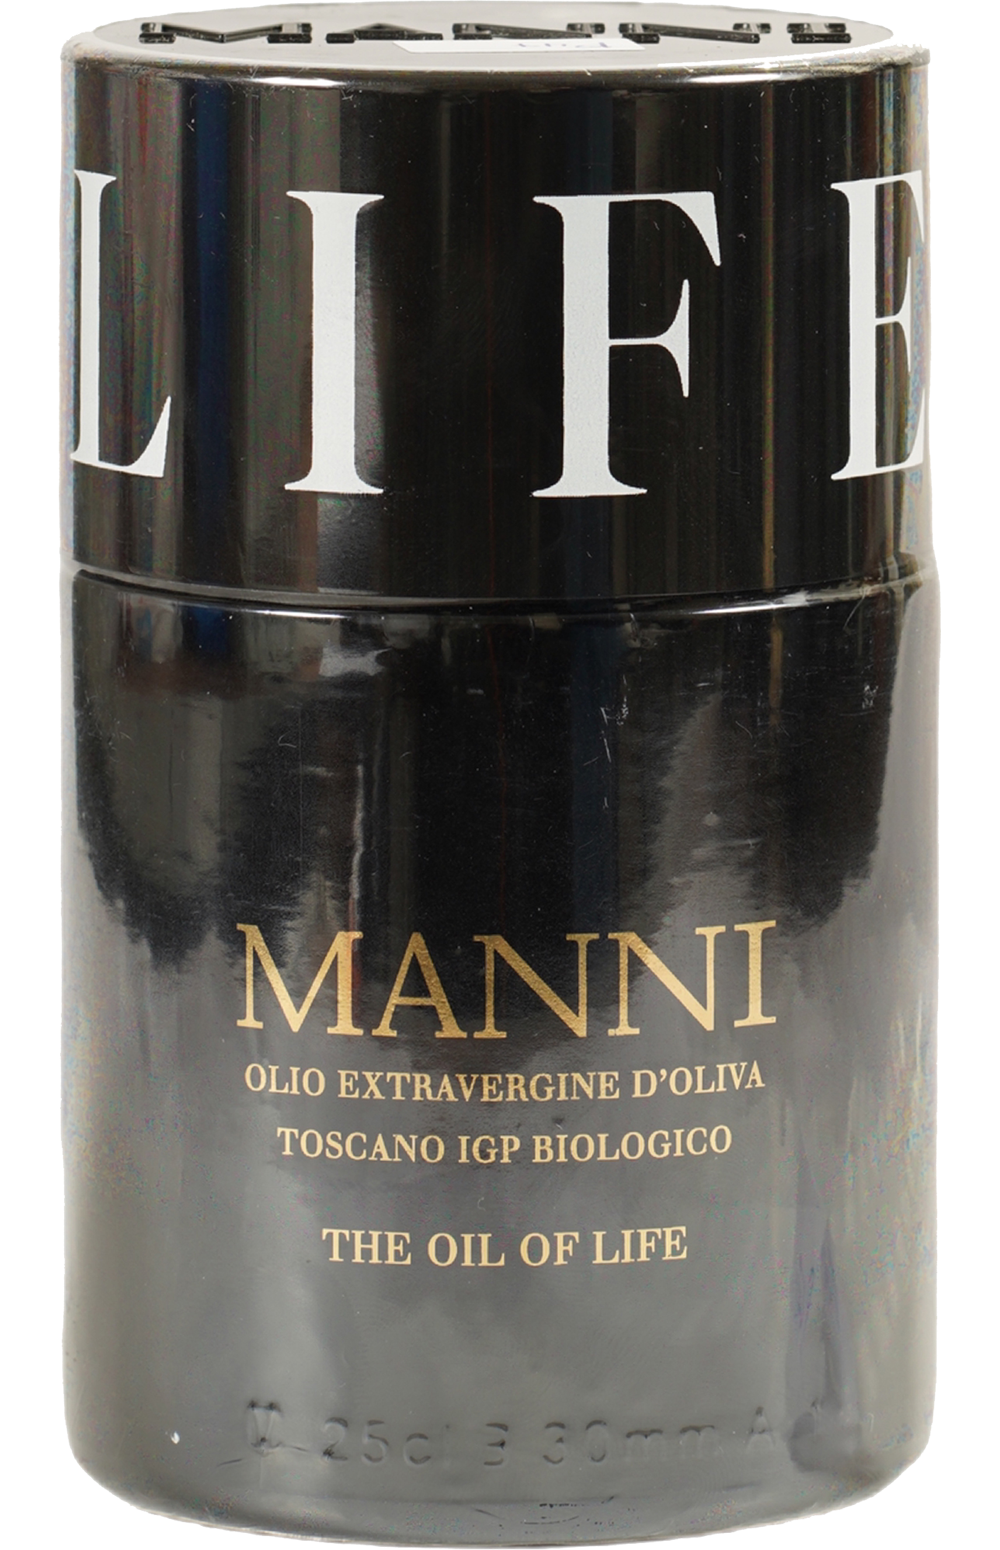 Manni- The oil of life